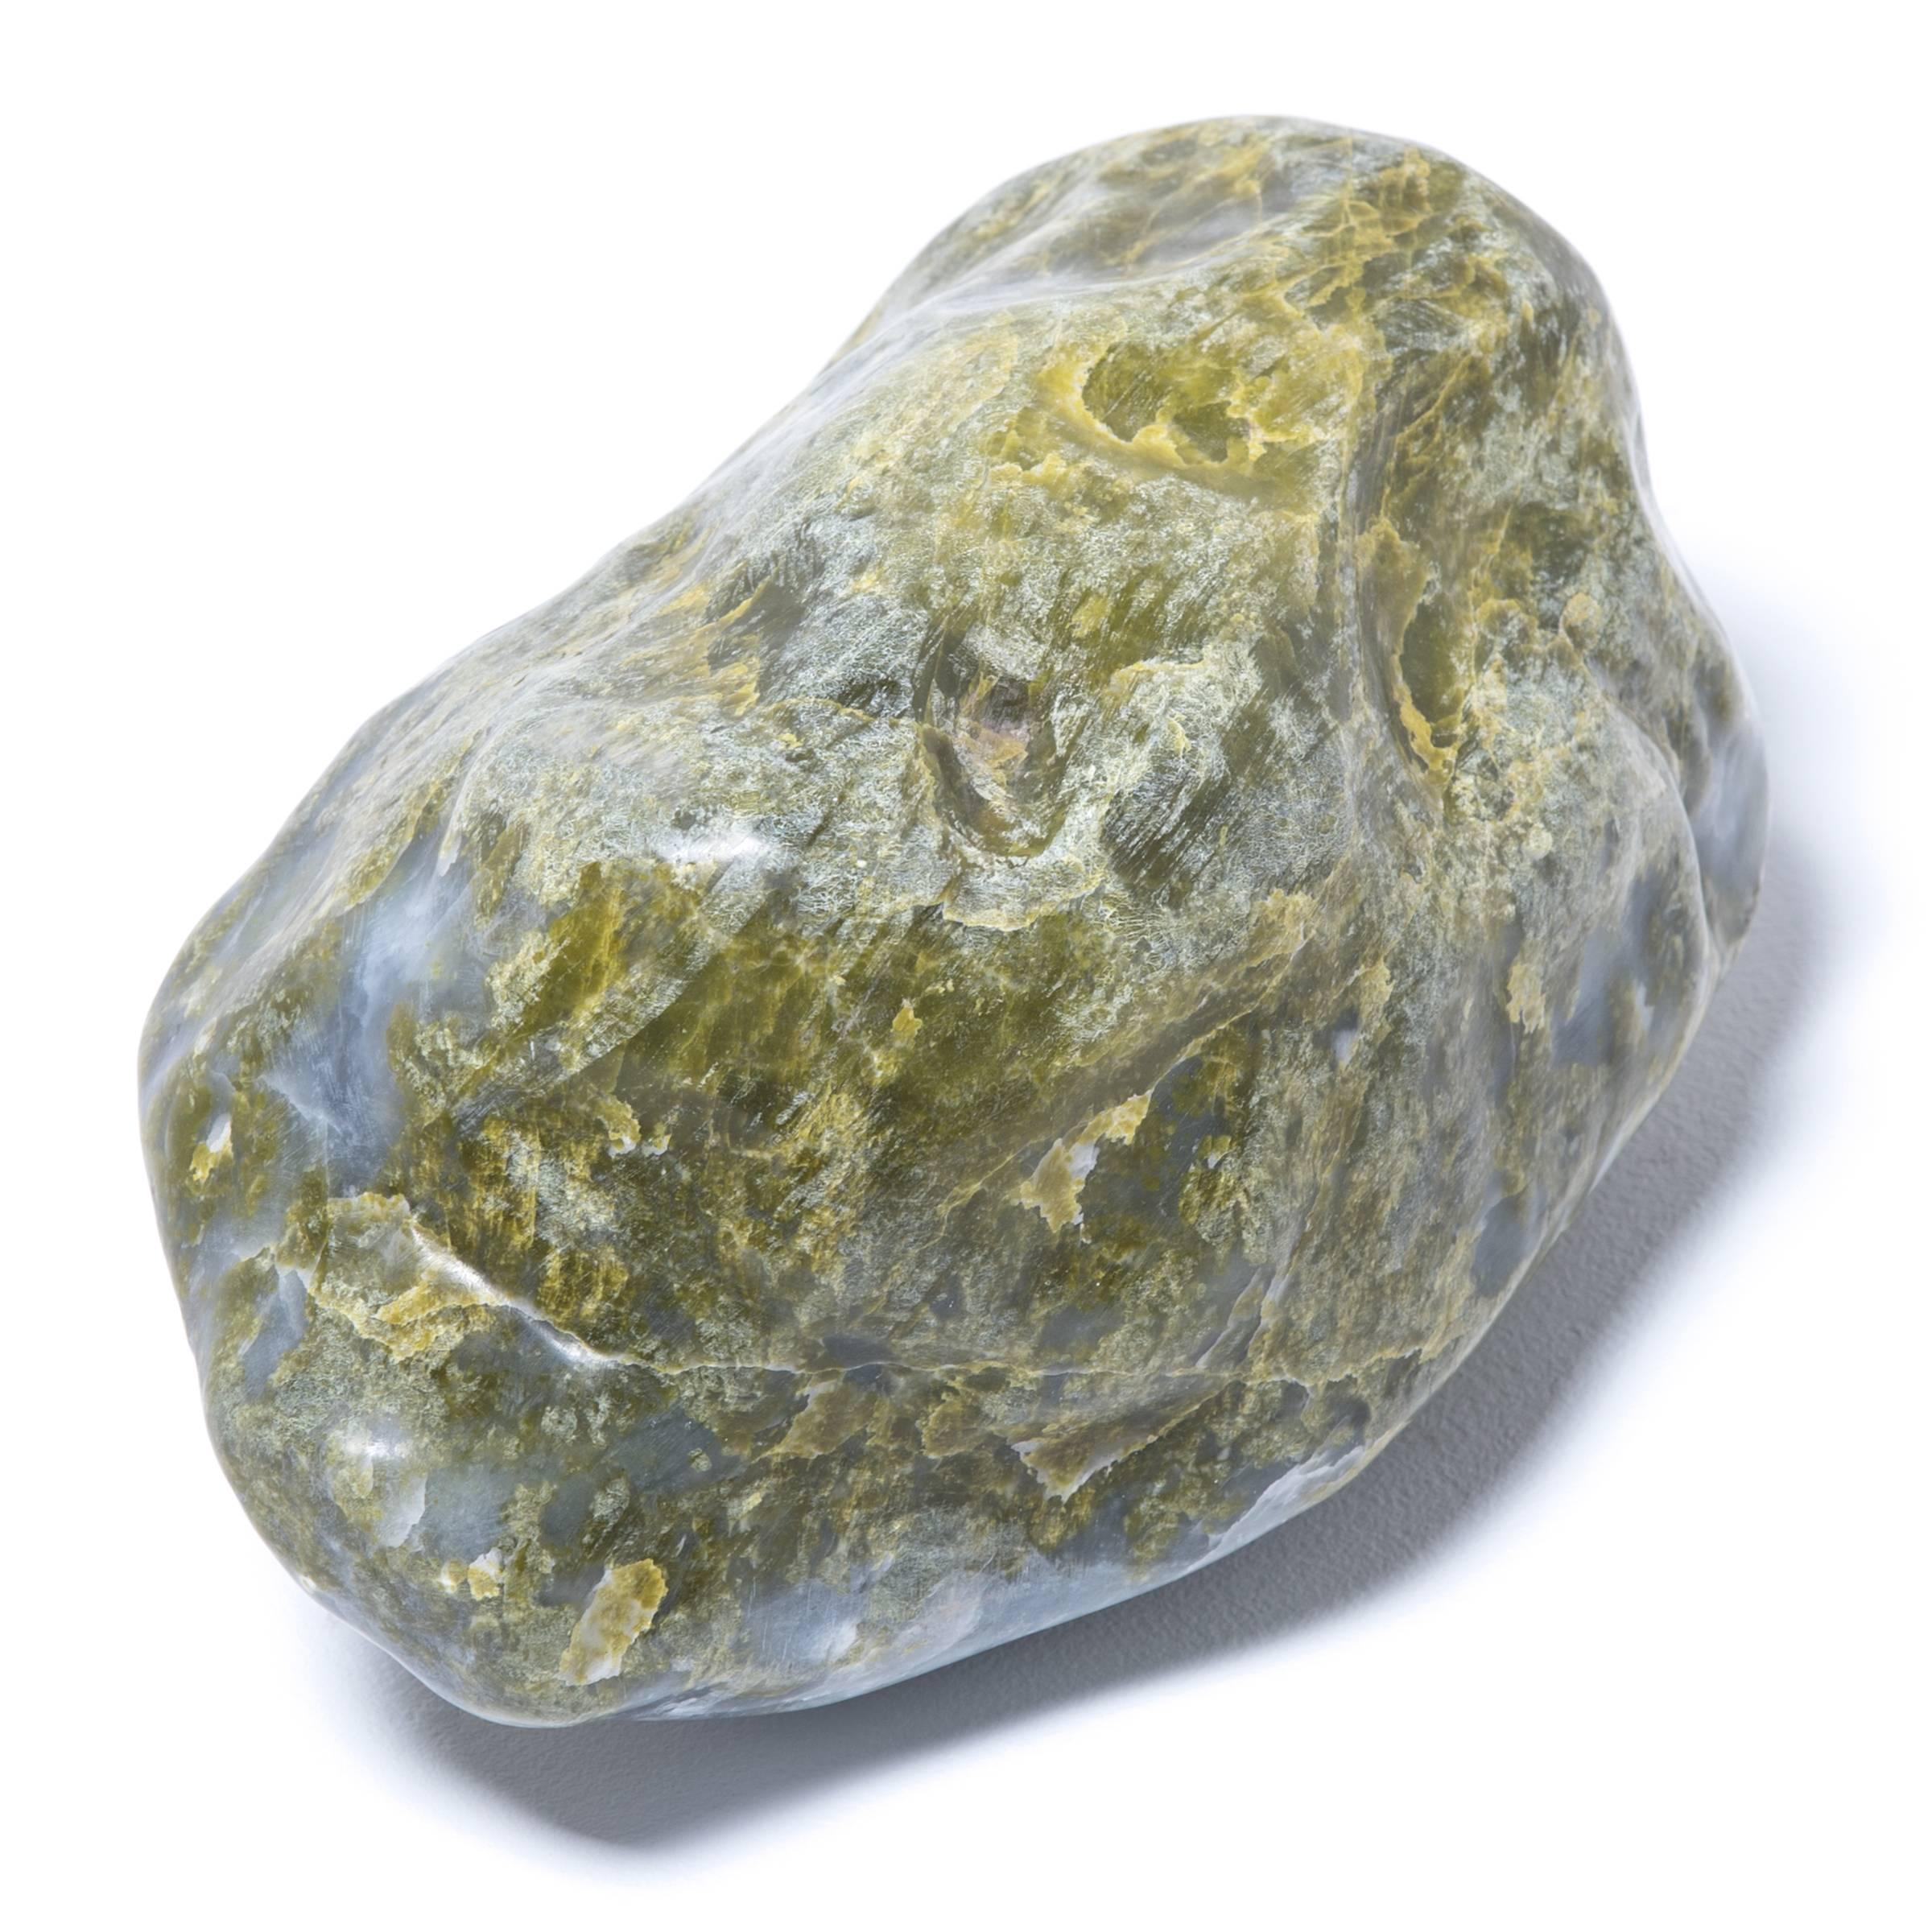 In China, Lantian Jade stones have been highly prized since ancient times for their smooth, clean texture and beautiful coloring. The calcite, lizardite and antigorite minerals in this precious stone give the jade a unique mix of hews: pale yellow